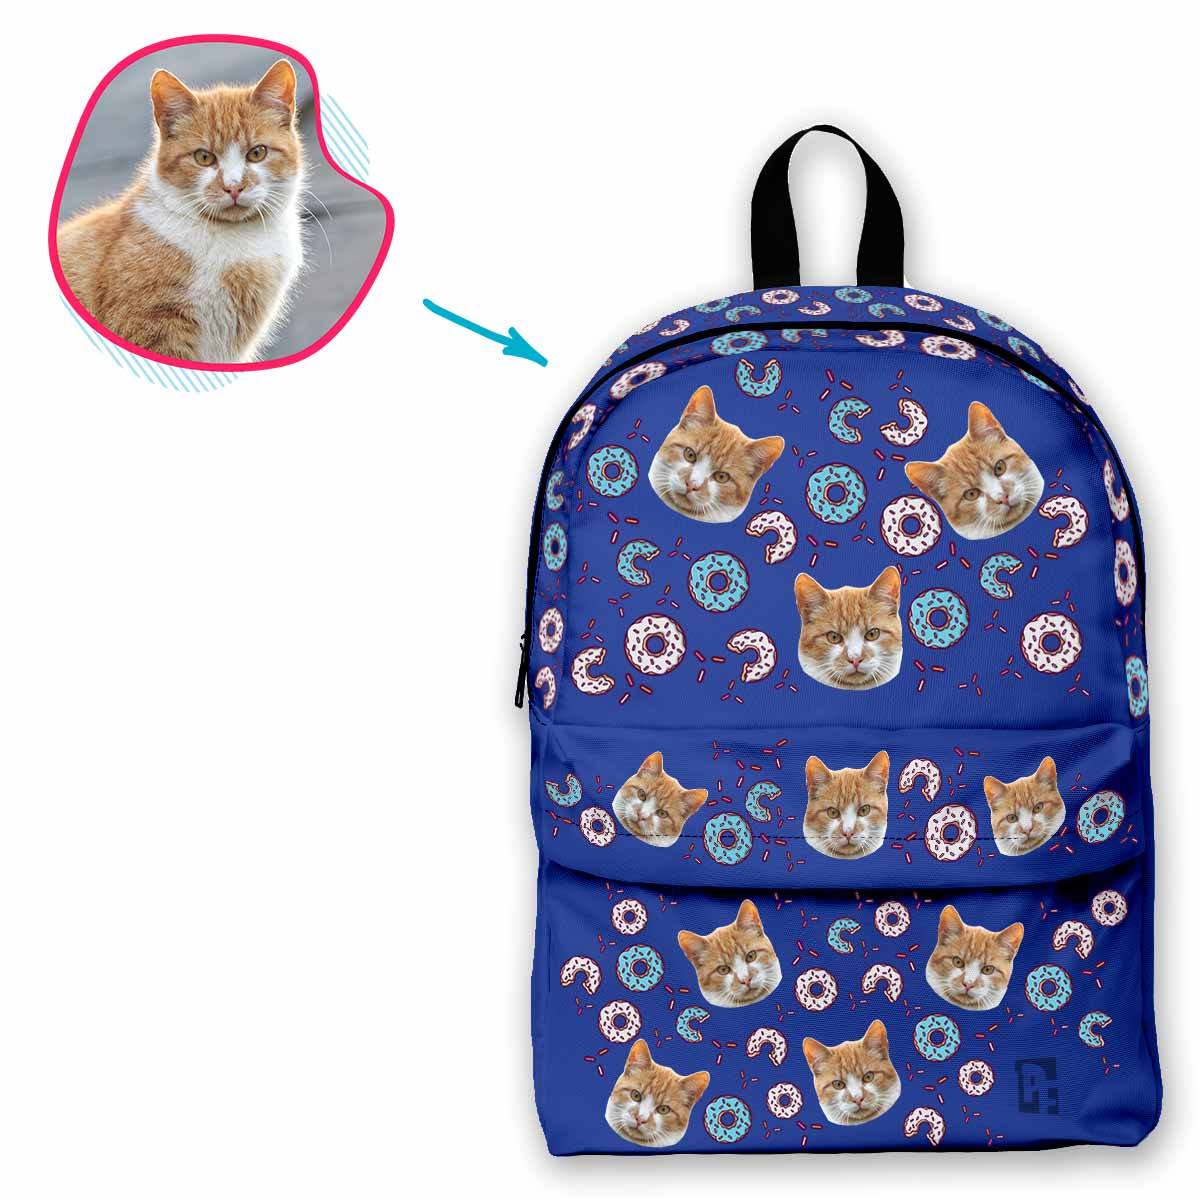 darkblue Donuts classic backpack personalized with photo of face printed on it